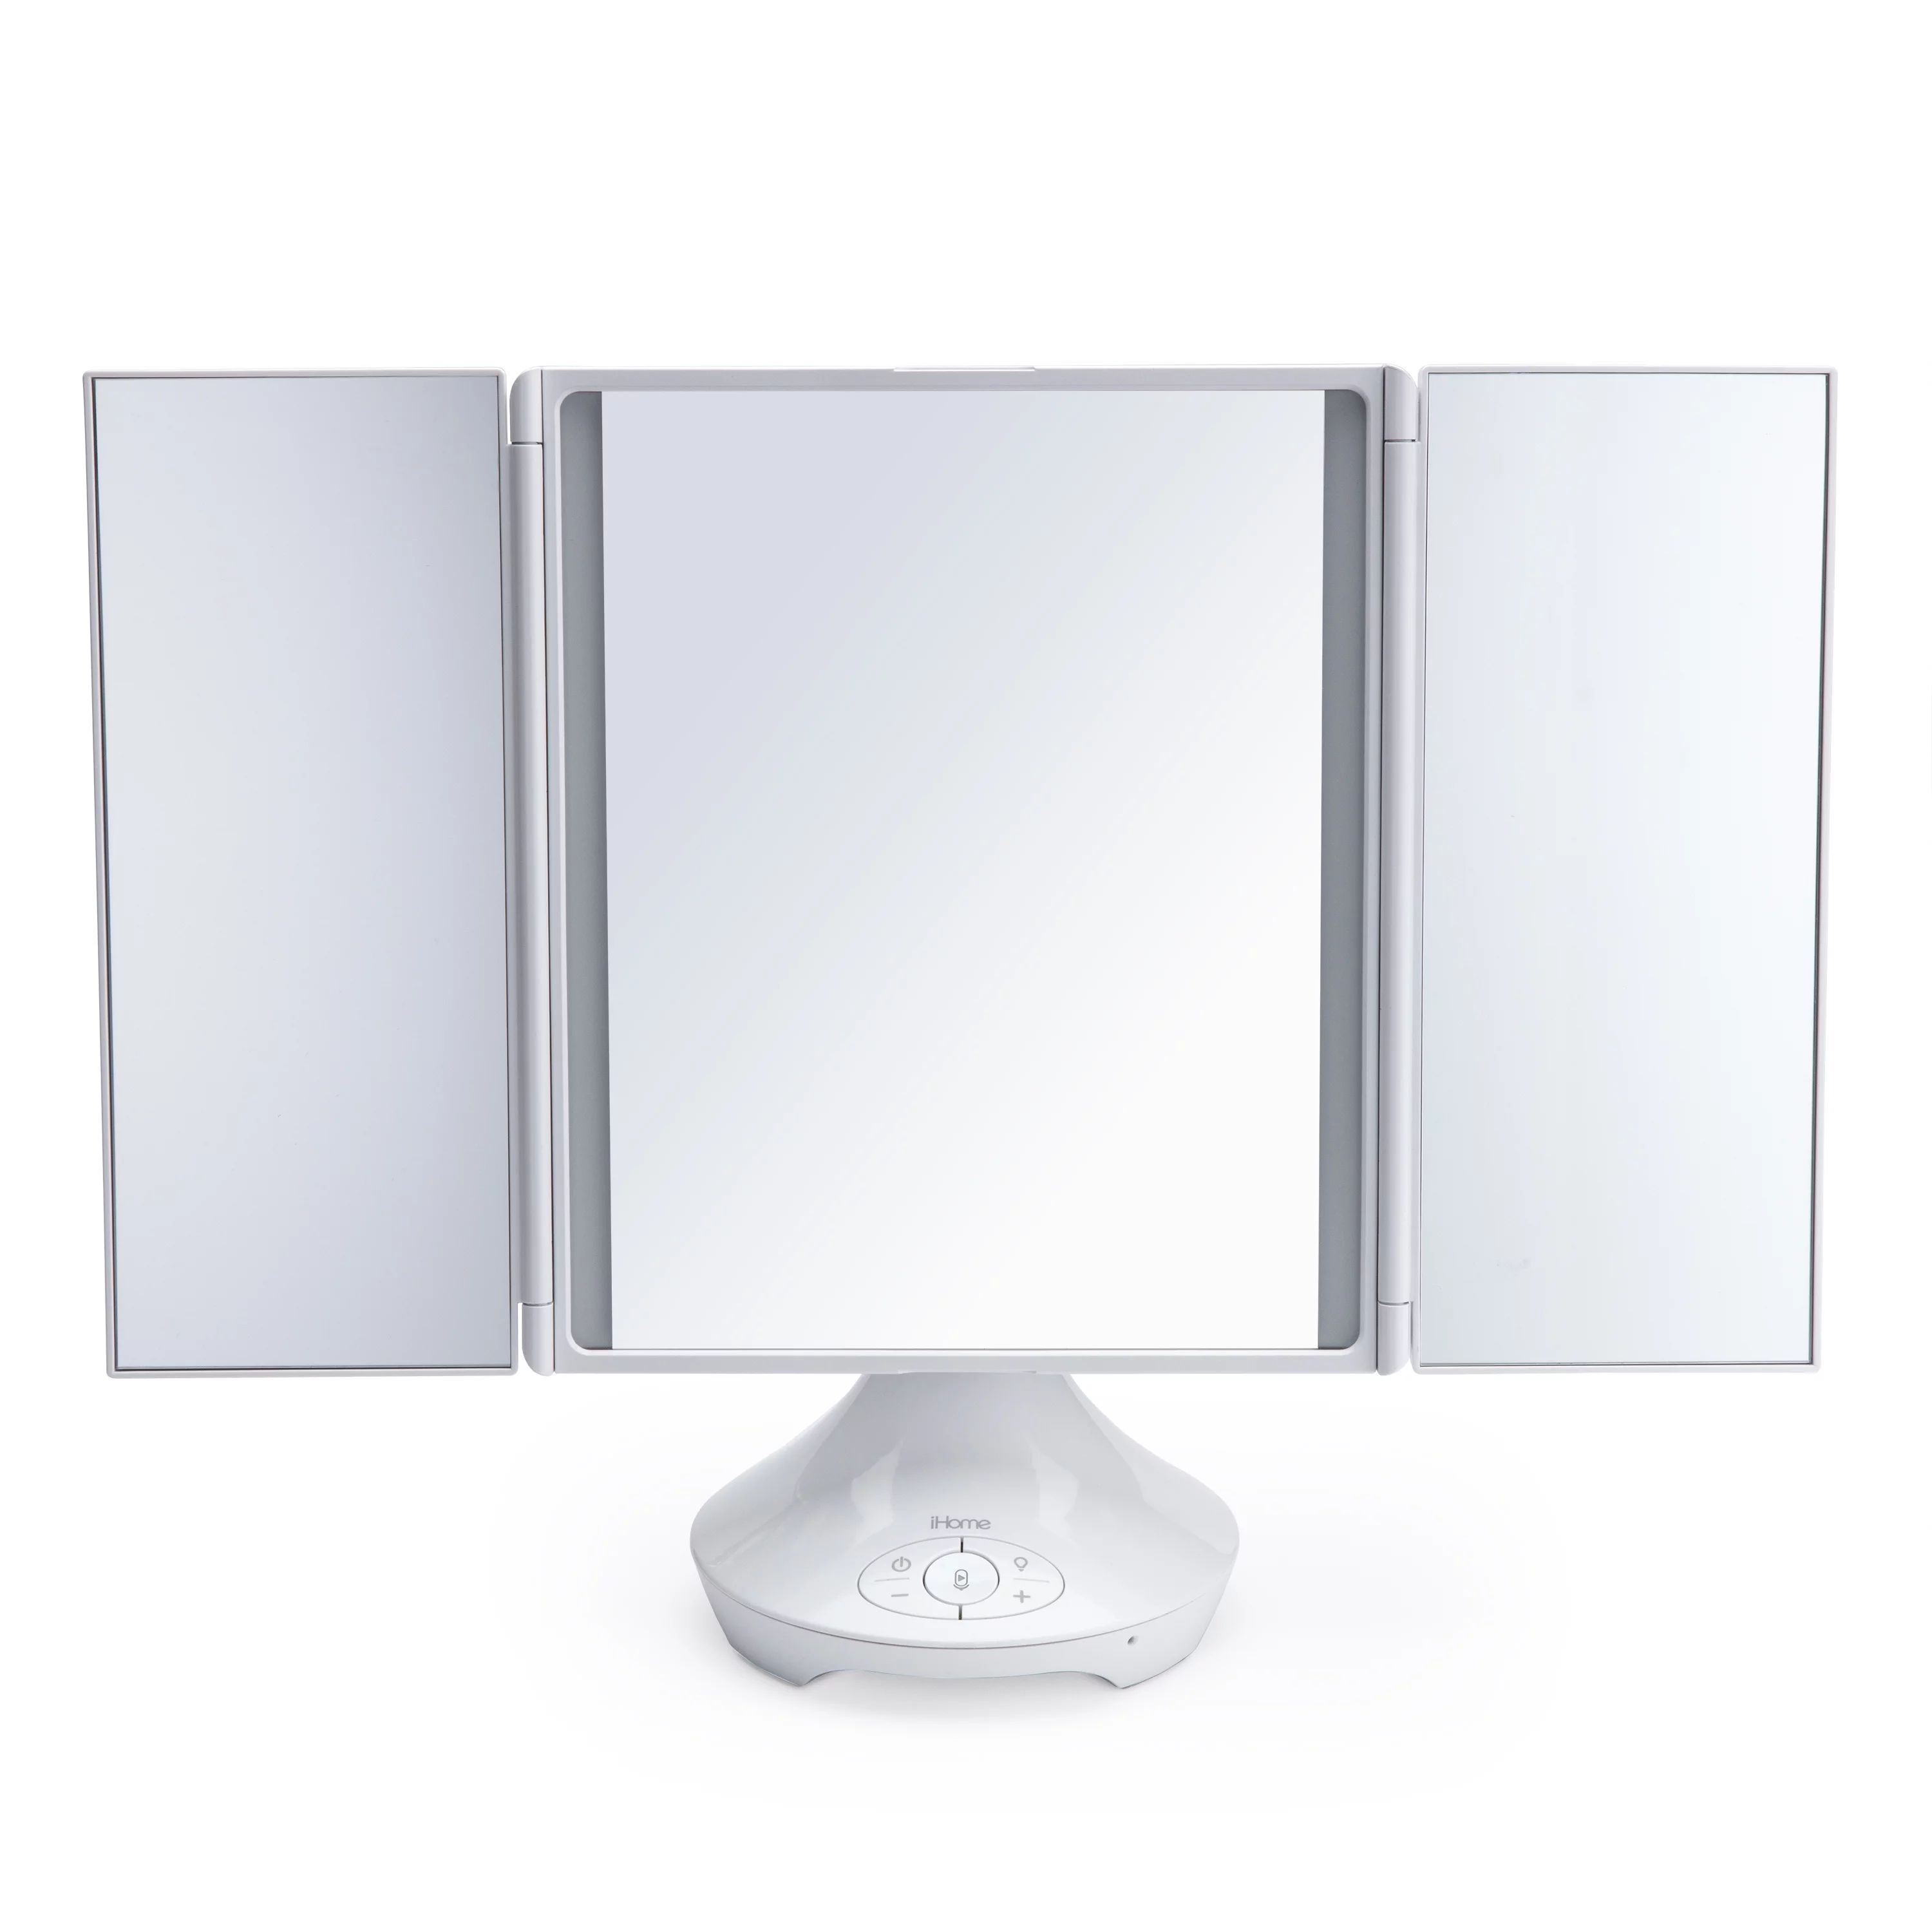 iHome Beauty iCVBT40 15" x 9" Trifold Tabletop Vanity Mirror with Bluetooth Speaker, White | Walmart (US)